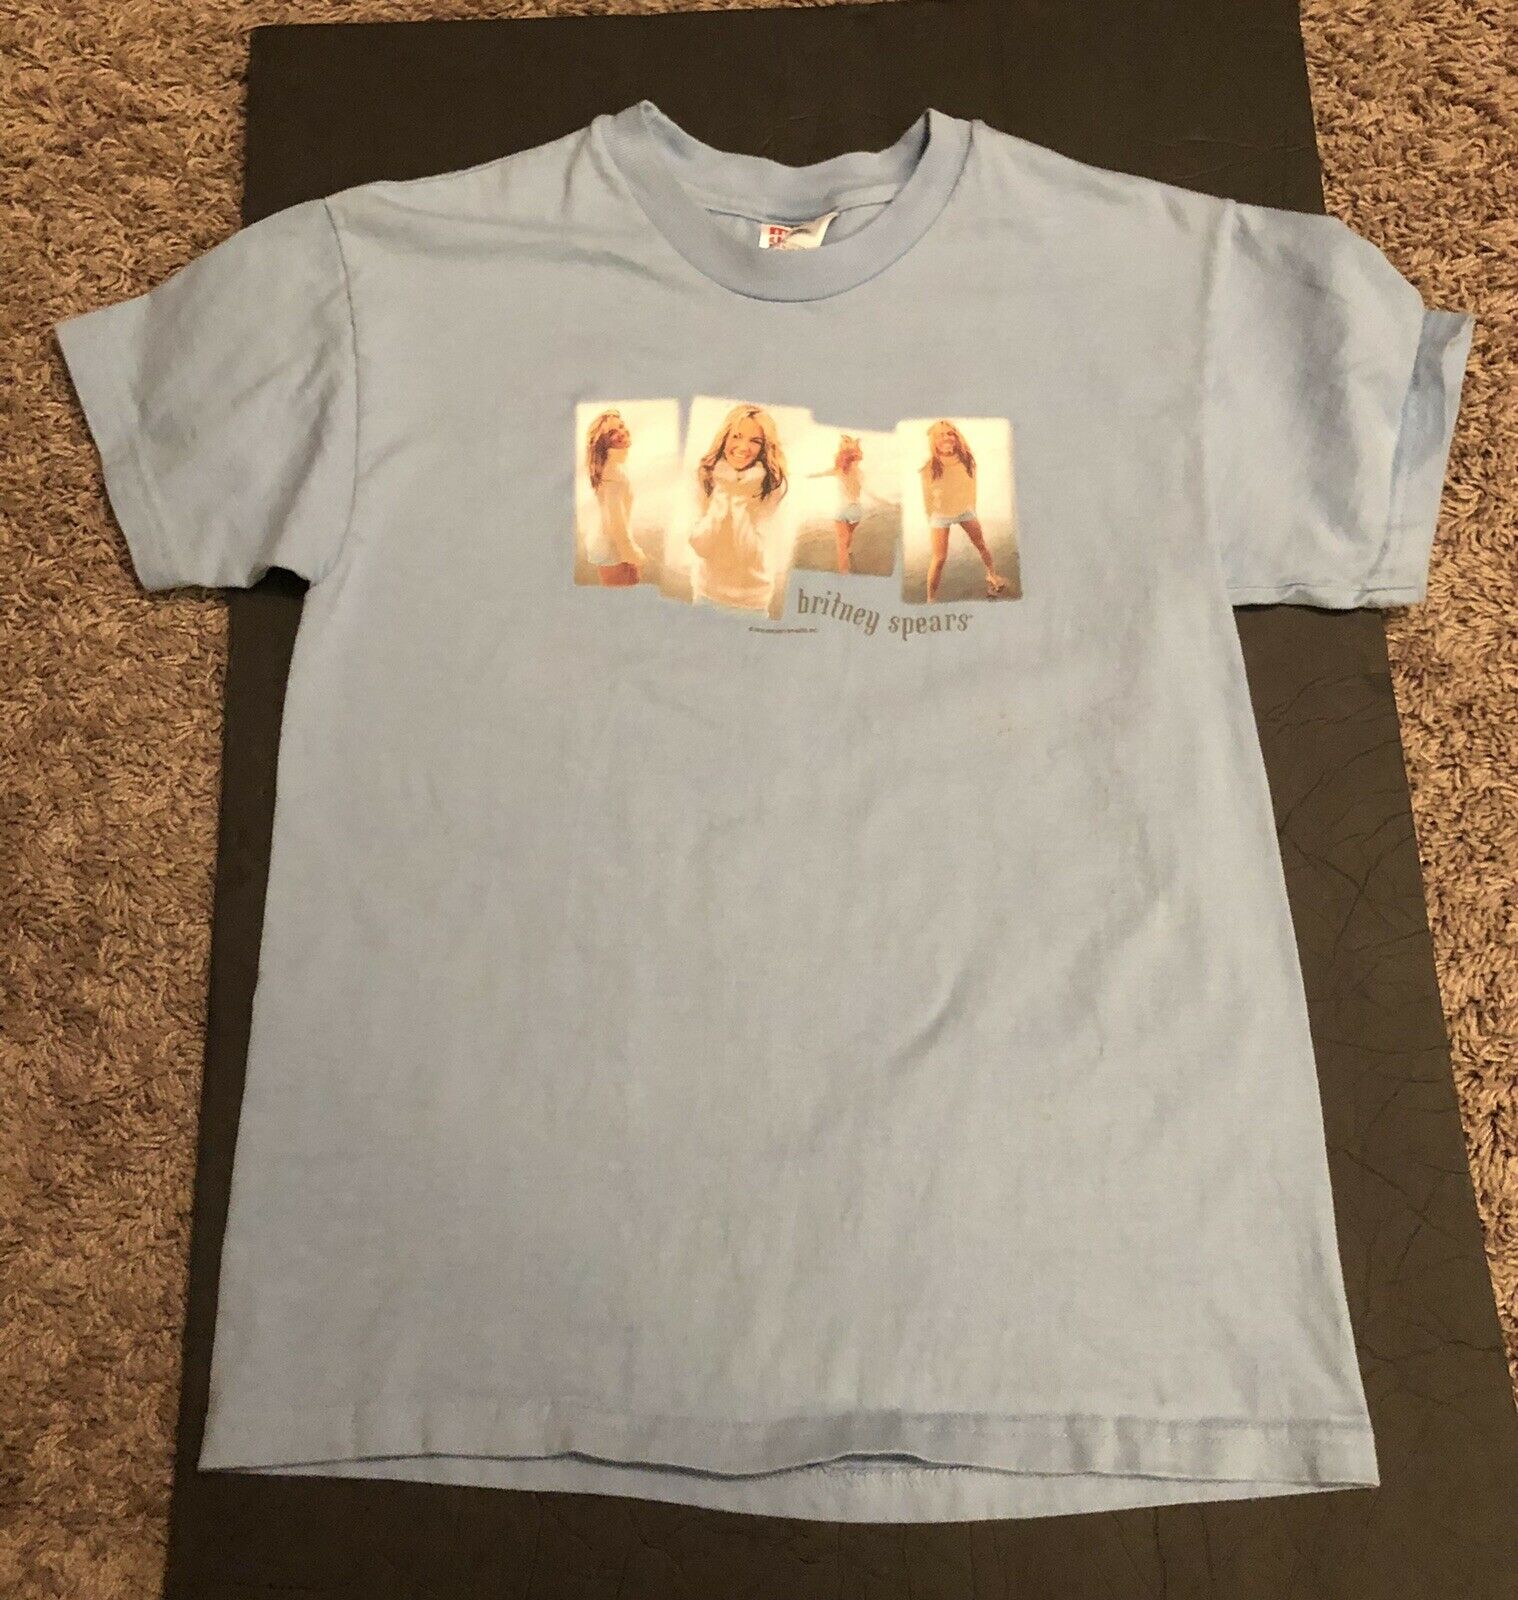 Vintage 2000 Britney Spears Size Youth 14/16 Tshirt